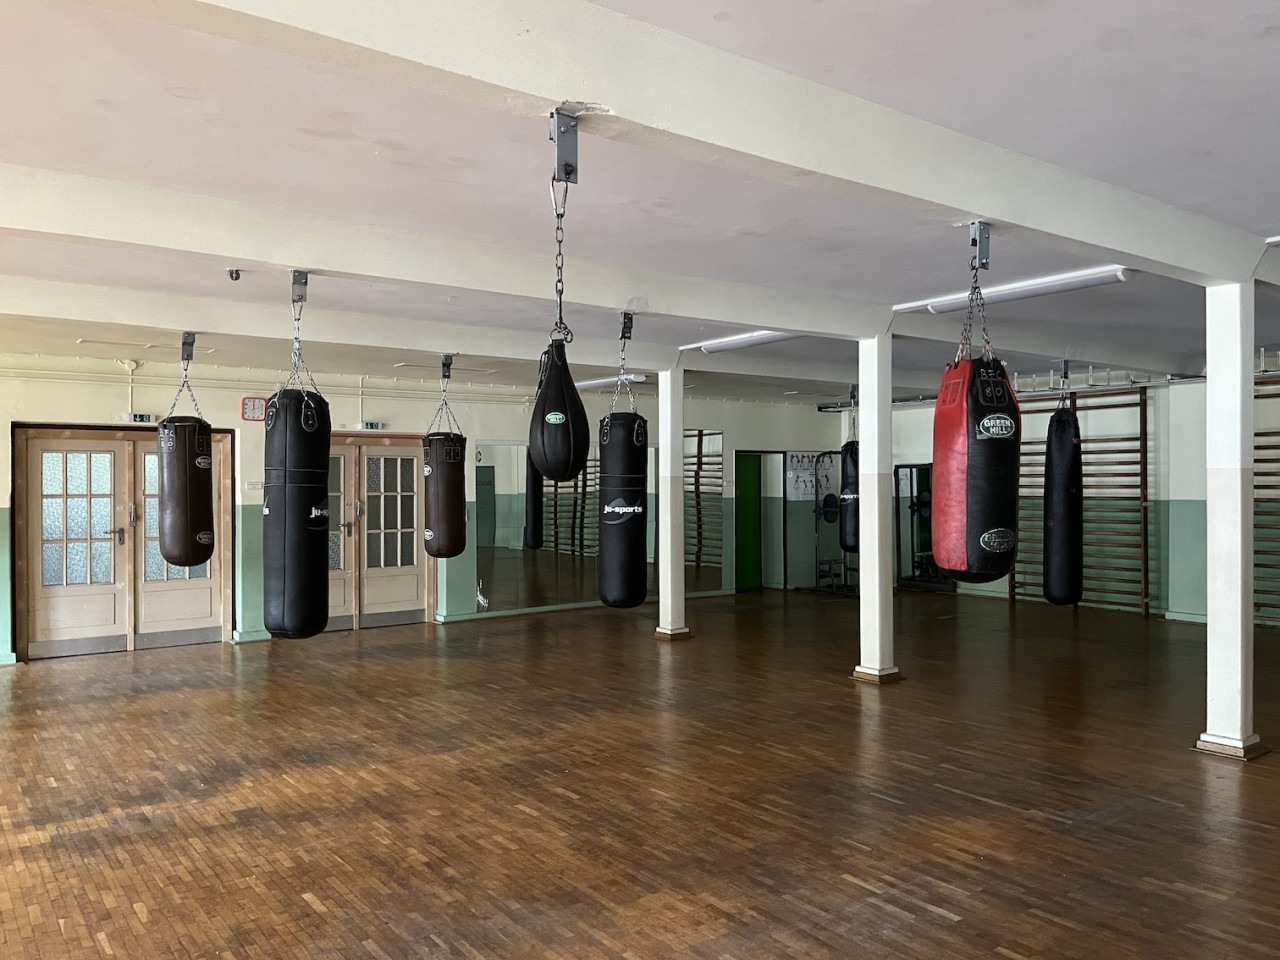 plush74 location film photo event germany berlin vintage gym fitness boxing 156